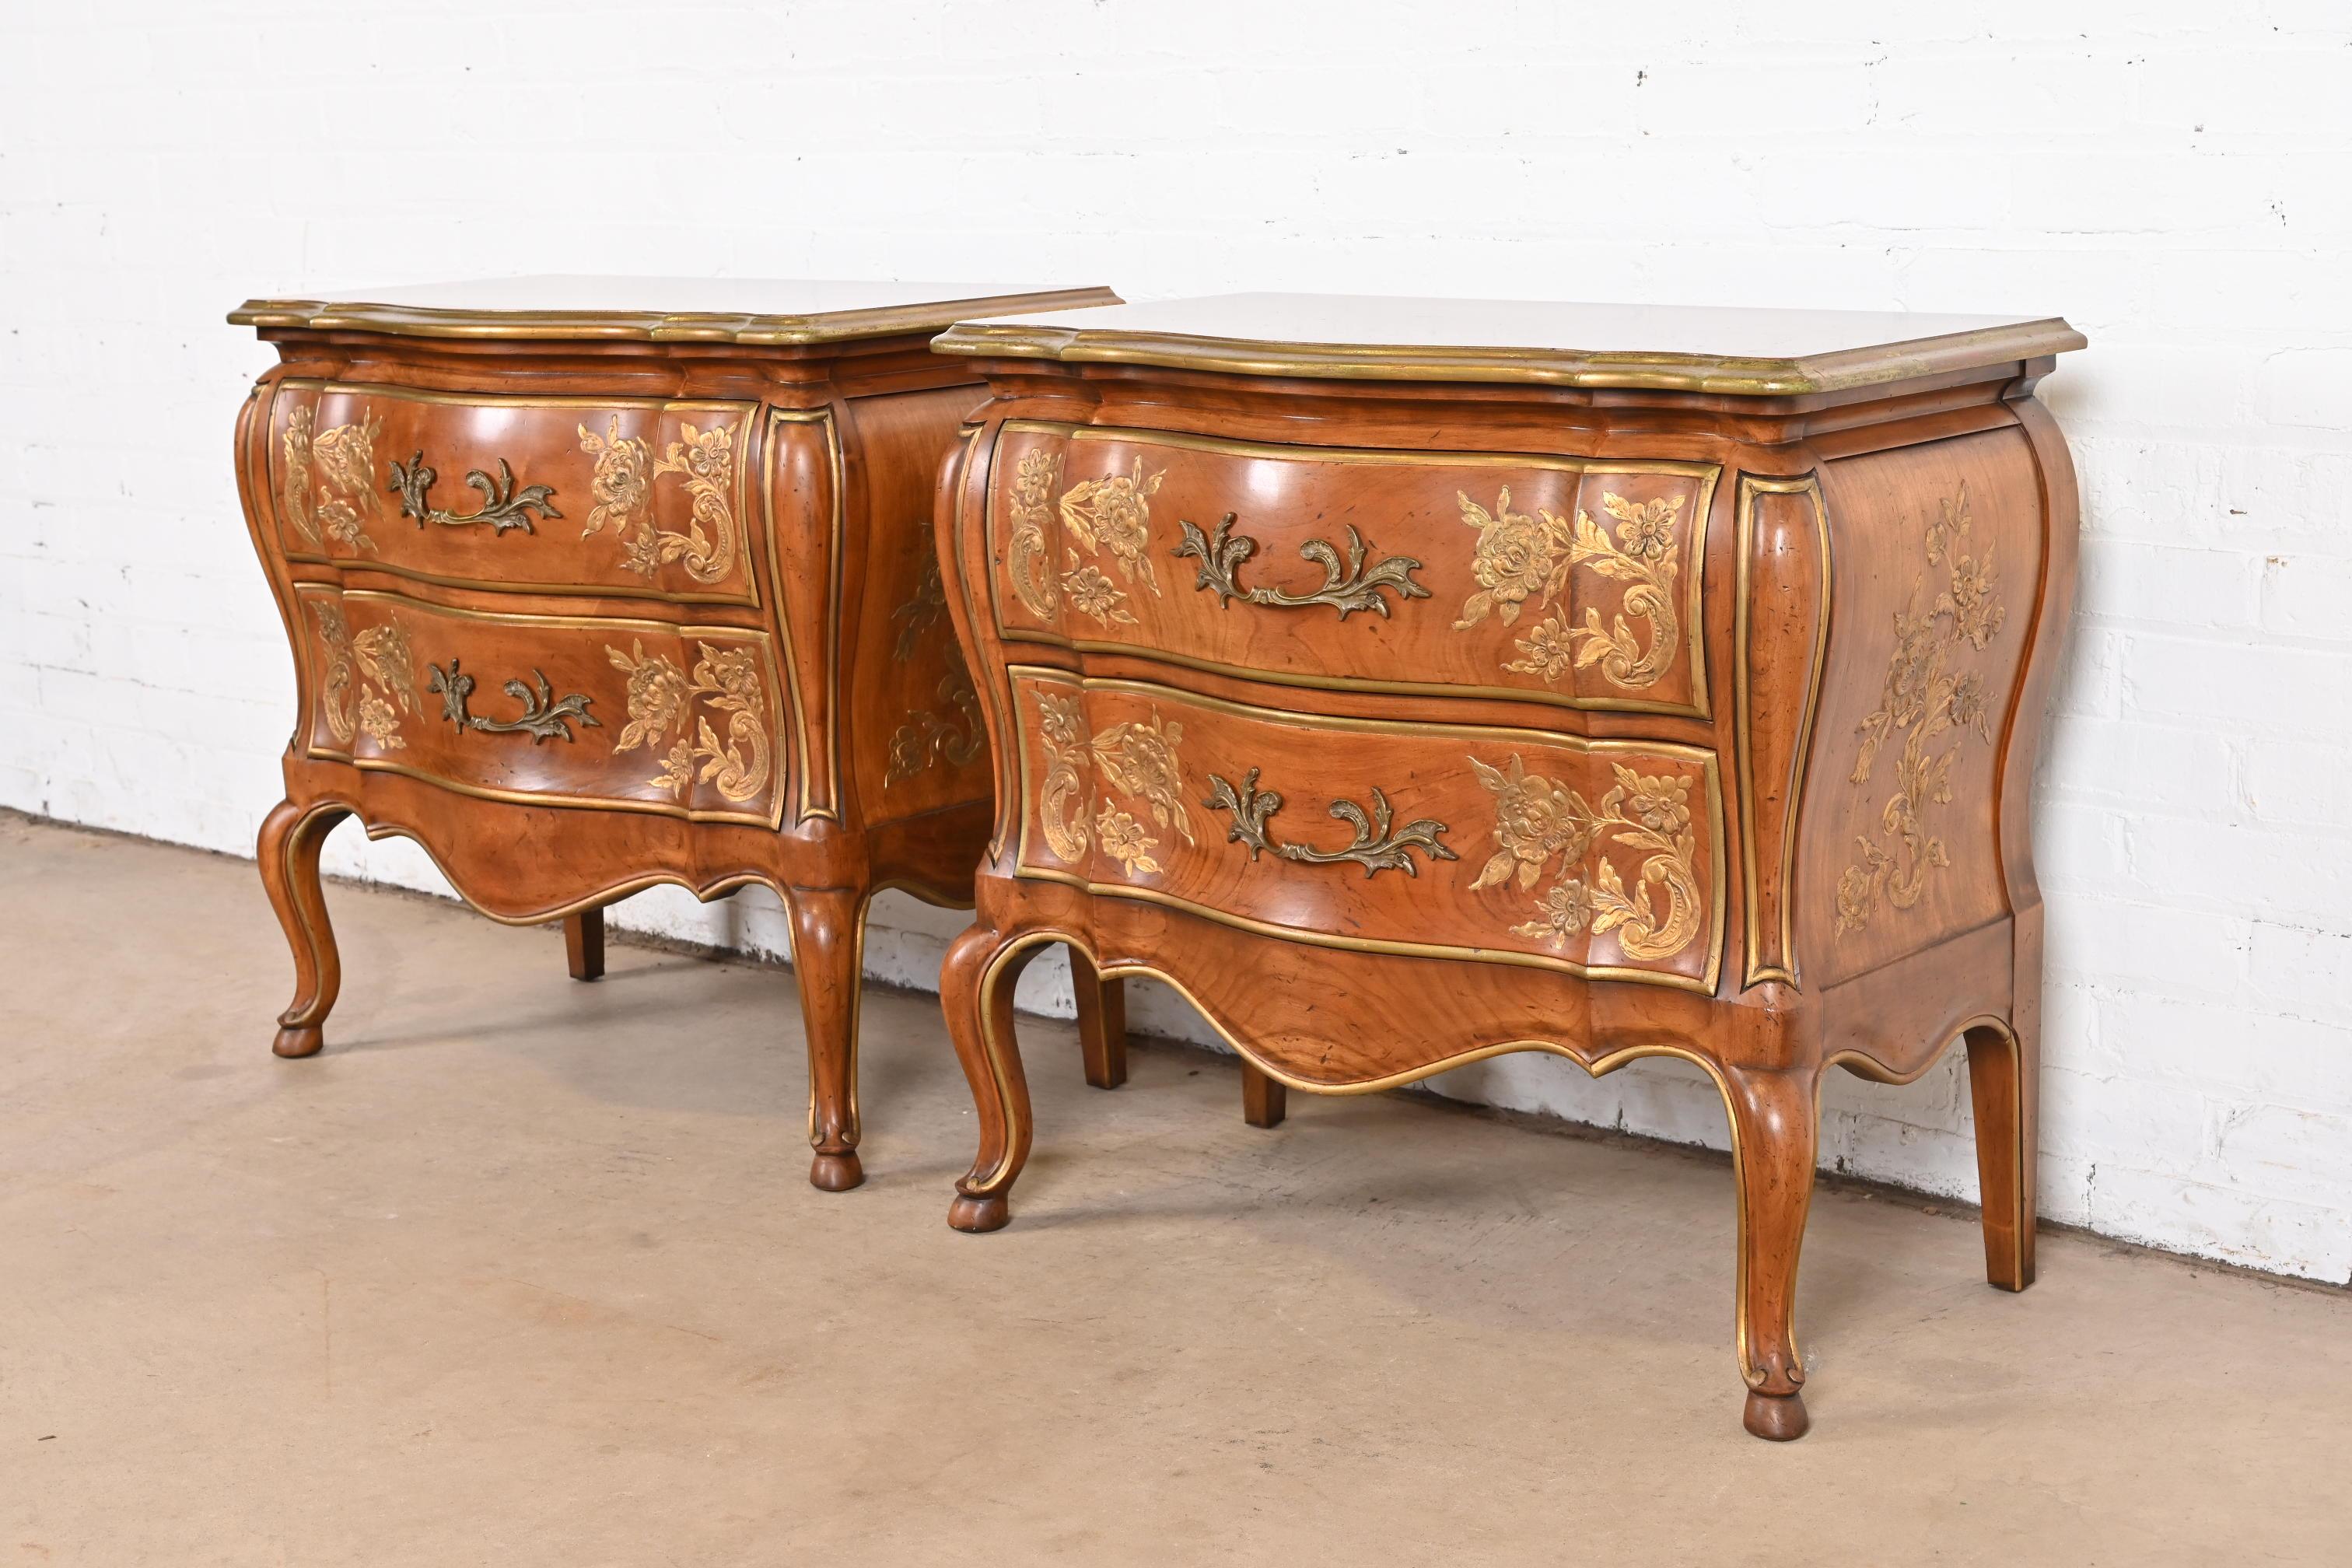 A gorgeous pair of French Provincial Louis XV style bombay form commodes or bedside chests

By John Widdicomb

USA, Circa 1960s

Solid carved cherry wood, with gold gilt trim and floral details, and original brass hardware.

Measures: 30